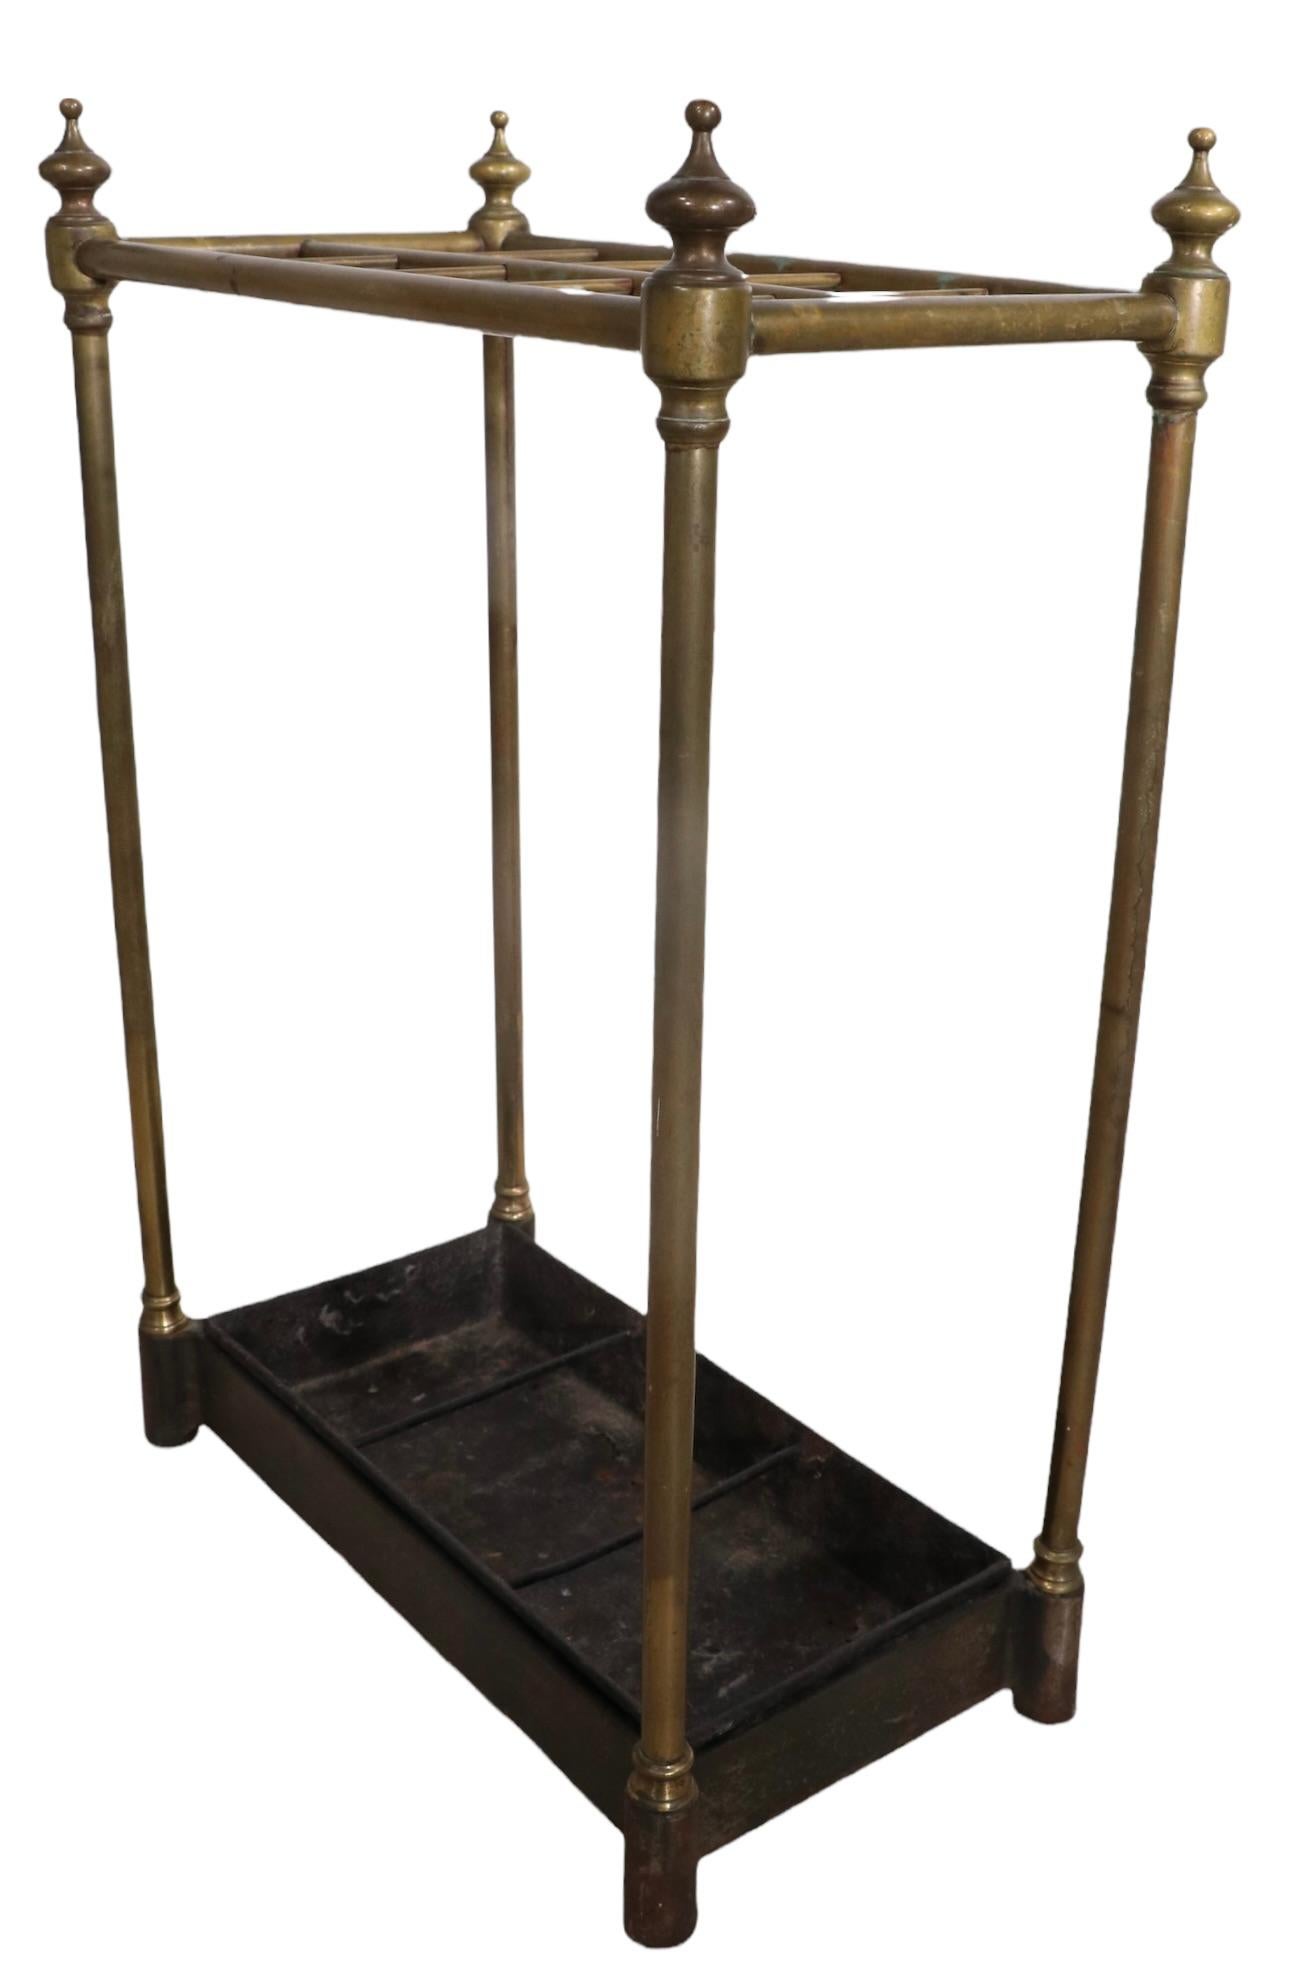 20th Century Architectural Brass and Iron Cane Umbrella Stand For Sale